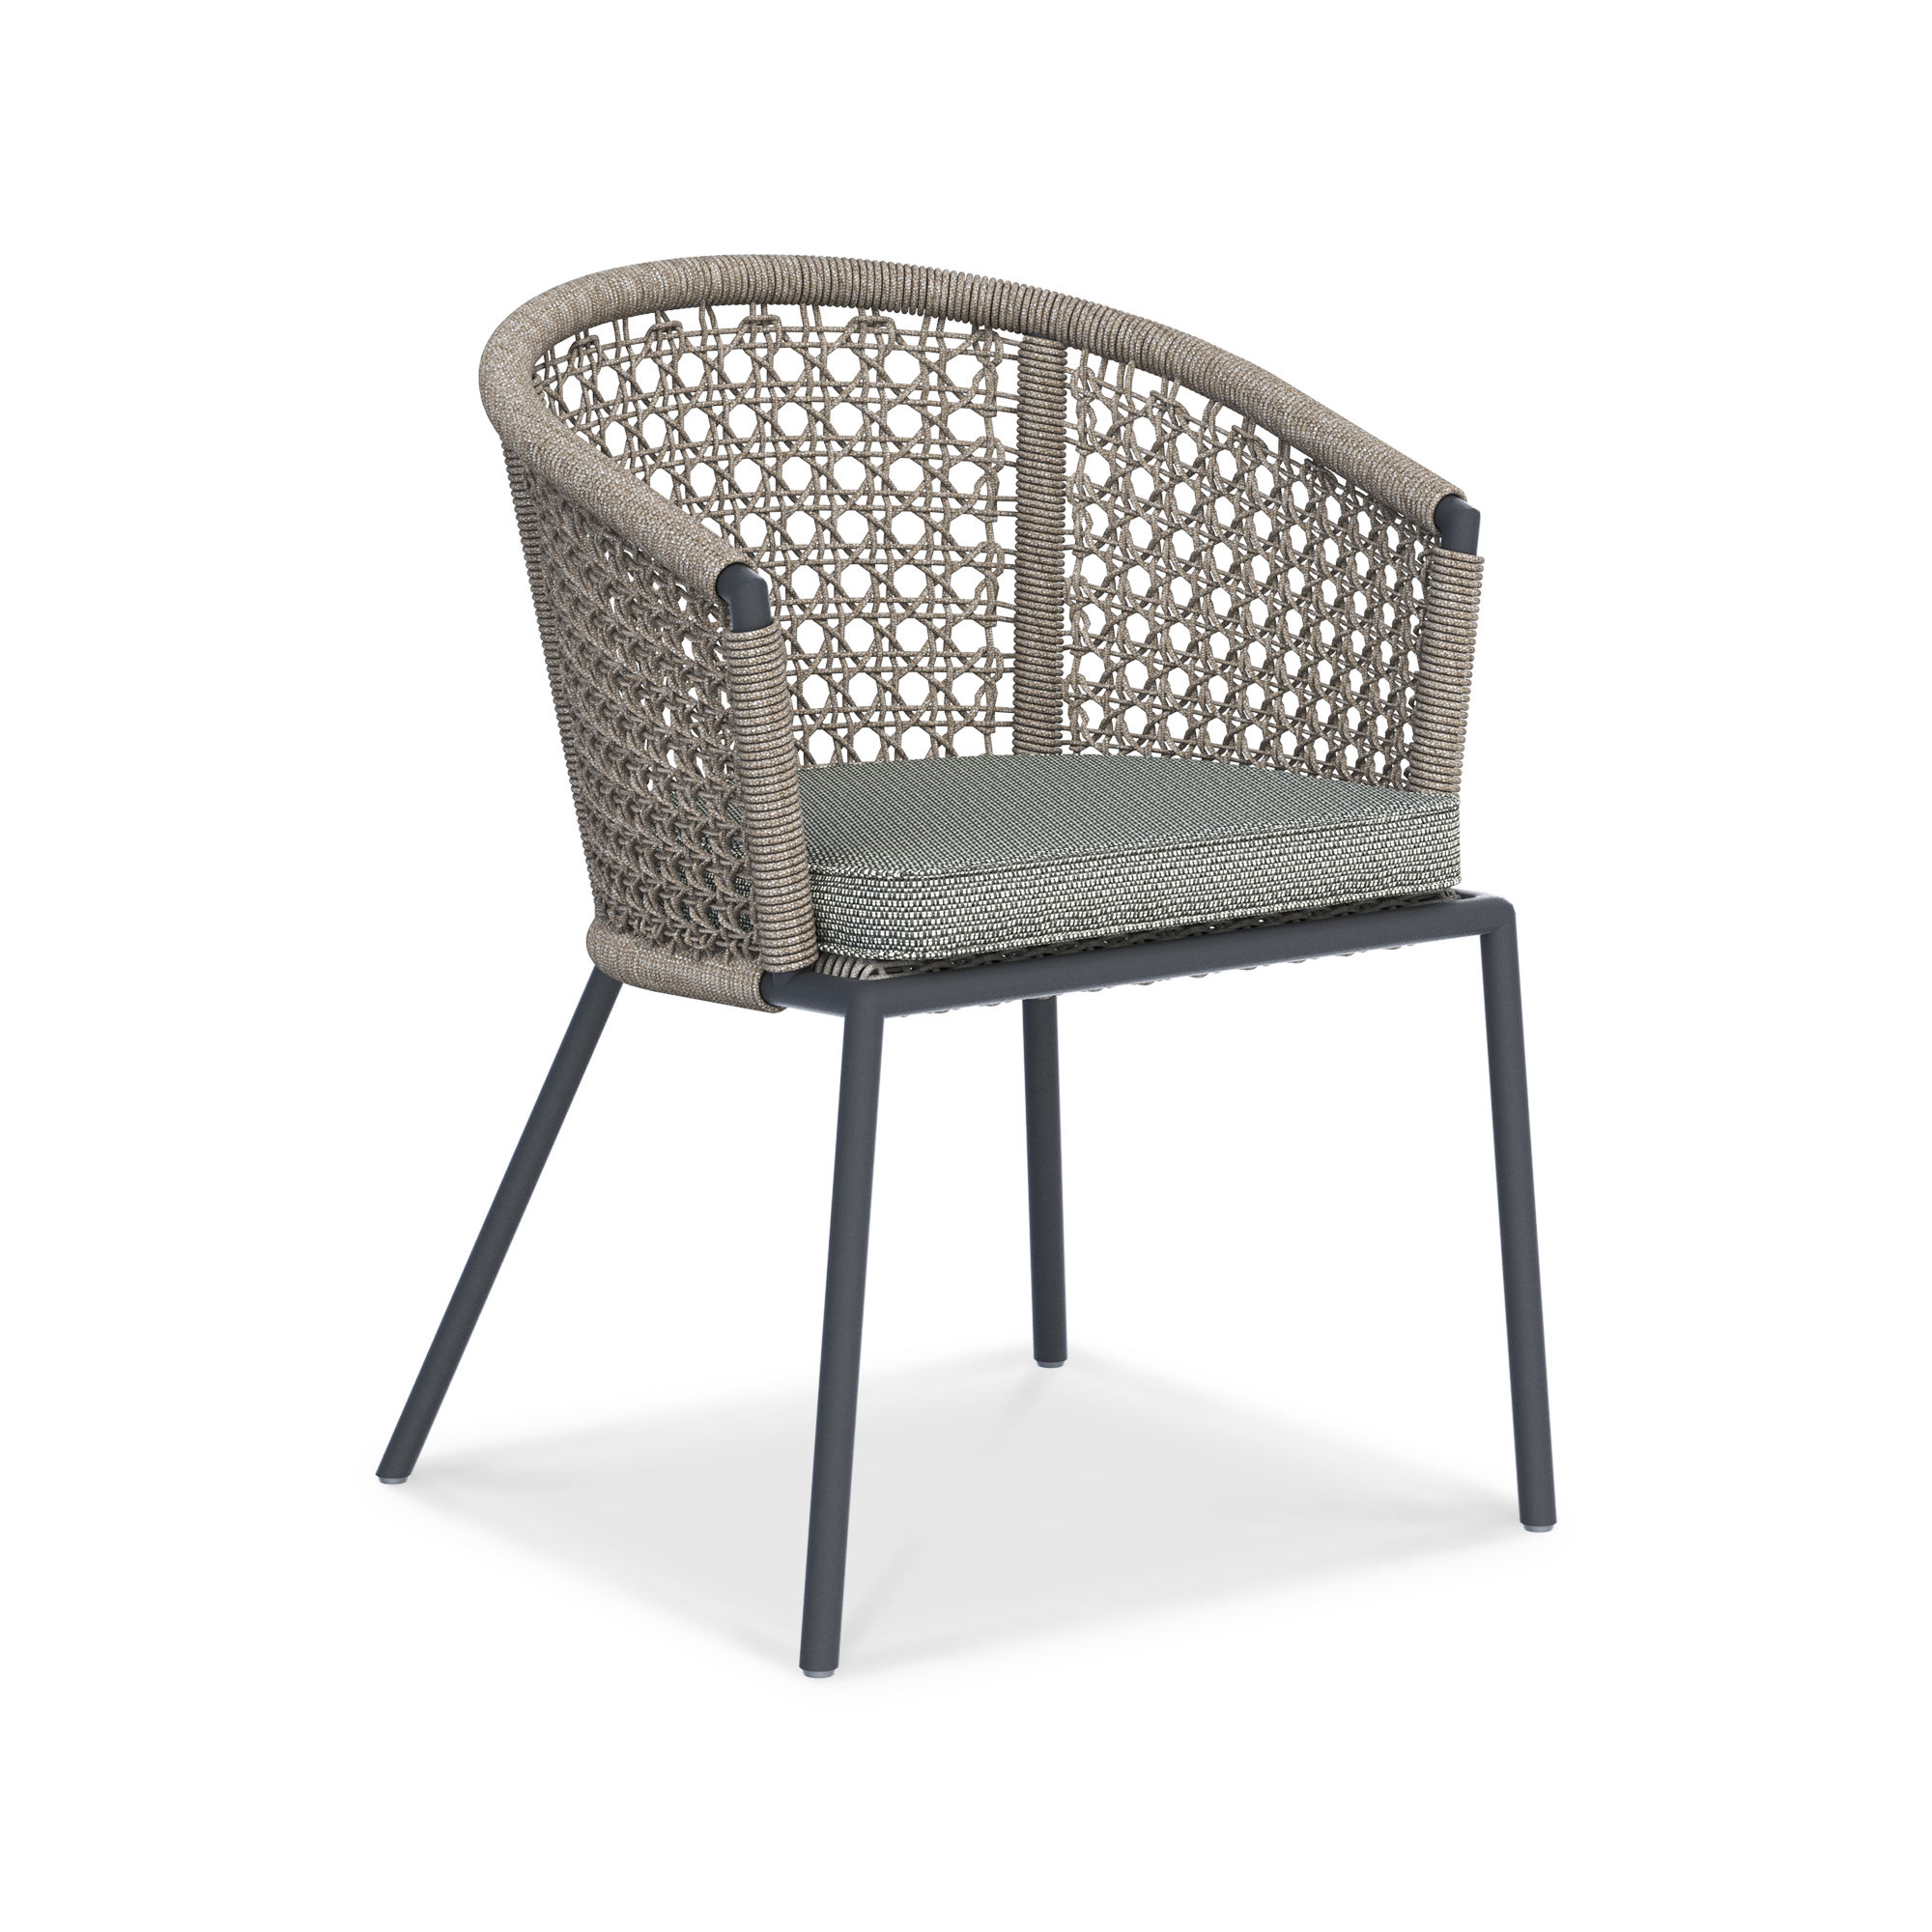 WINA DINING ROUND CHAIR PERS GREY